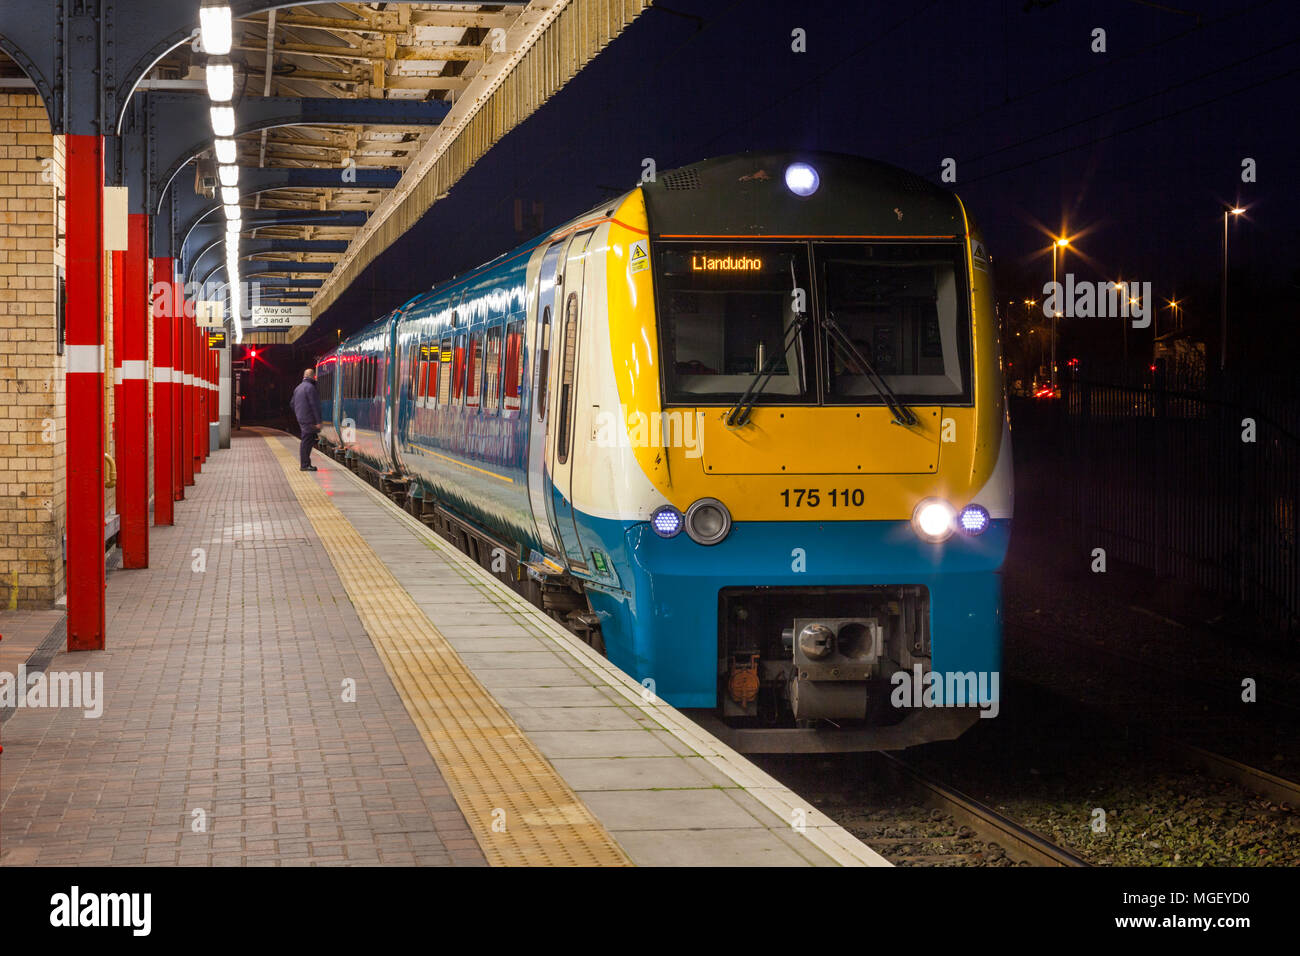 An  Arriva trains Wales class 175 diesel train calling at  Warrington Bank Quay railway station at night Stock Photo